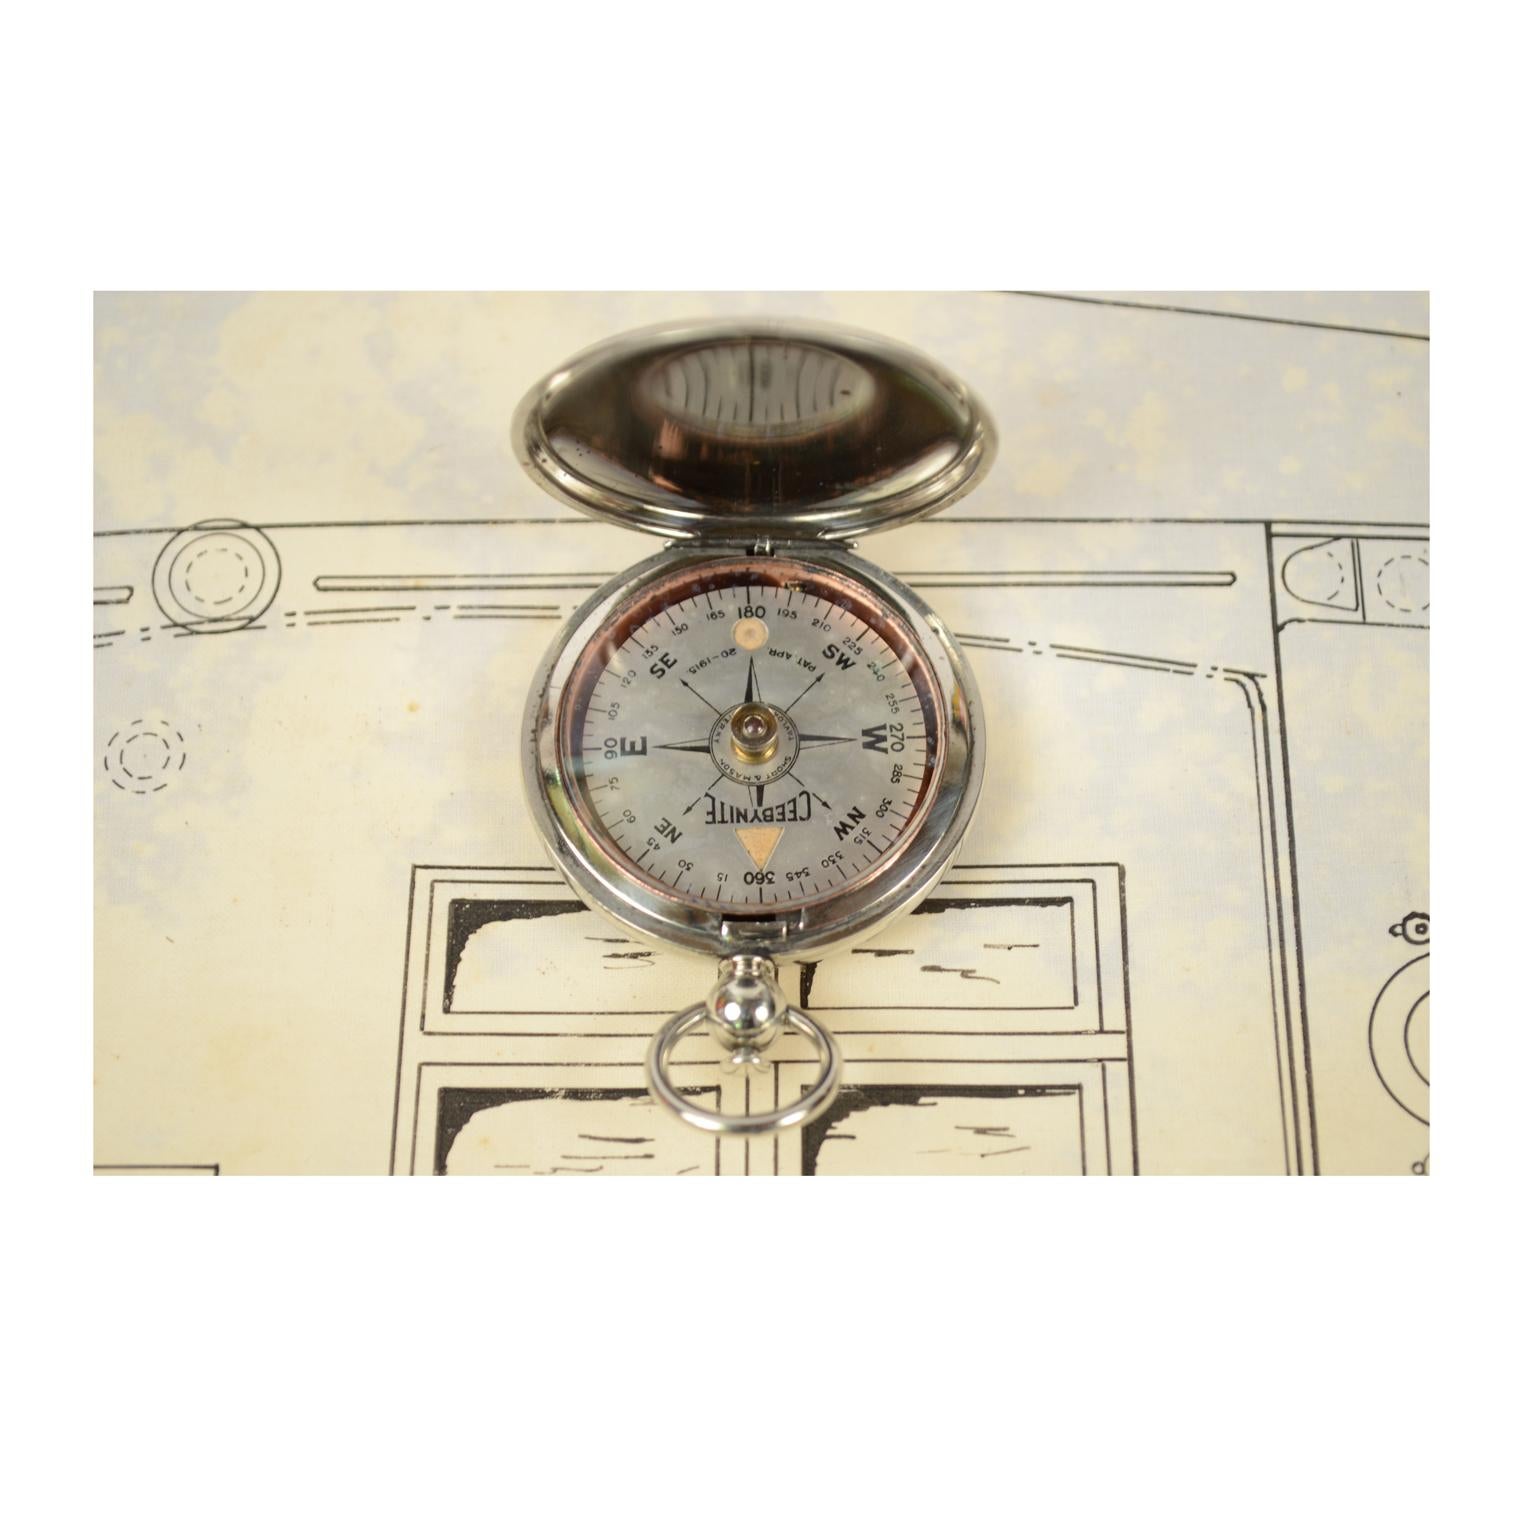 Pocket compass used by the officers of the US army in 1915, chromed brass shaped like a pocket watch, signed Ceebynite Short & Mason Taylor Rochester N.Y. The compass is equipped with a lid with snap closure and a release button inside the ring.